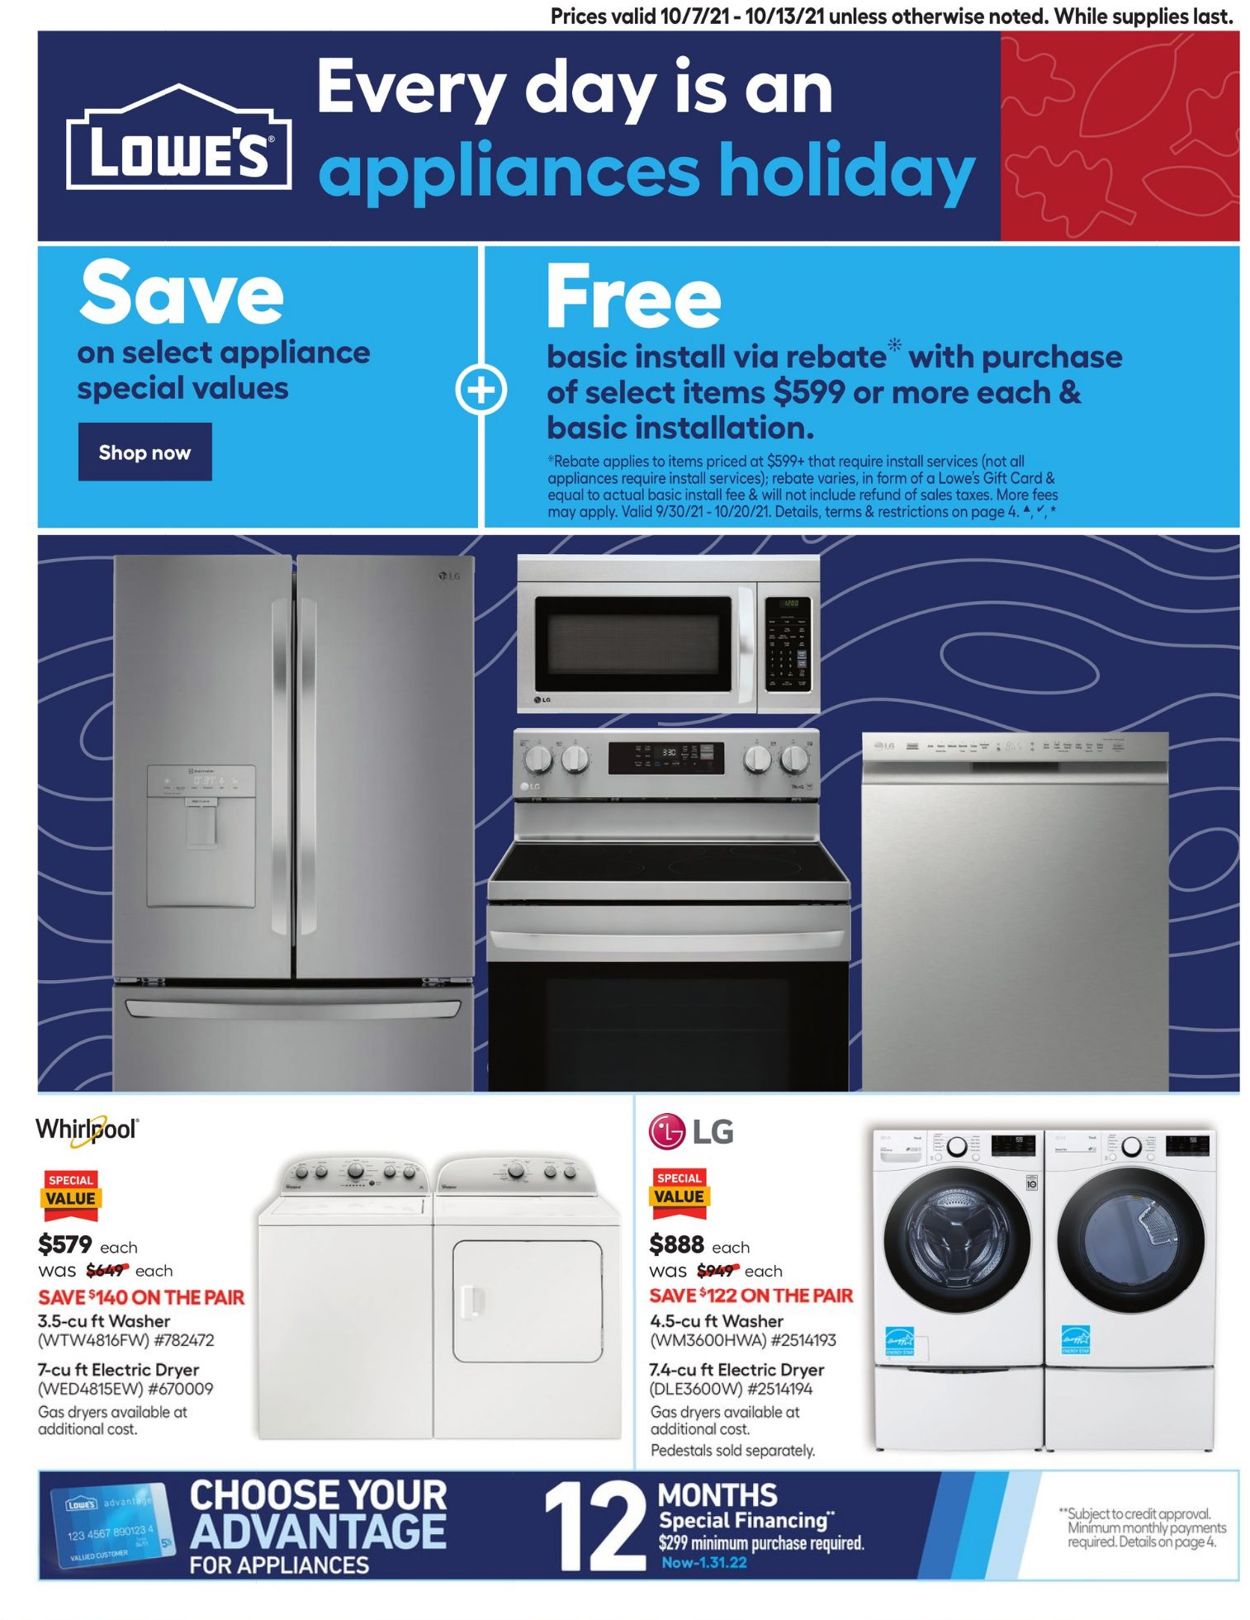 Does Lowe's Install Appliances? (What's Included, Cost + More)